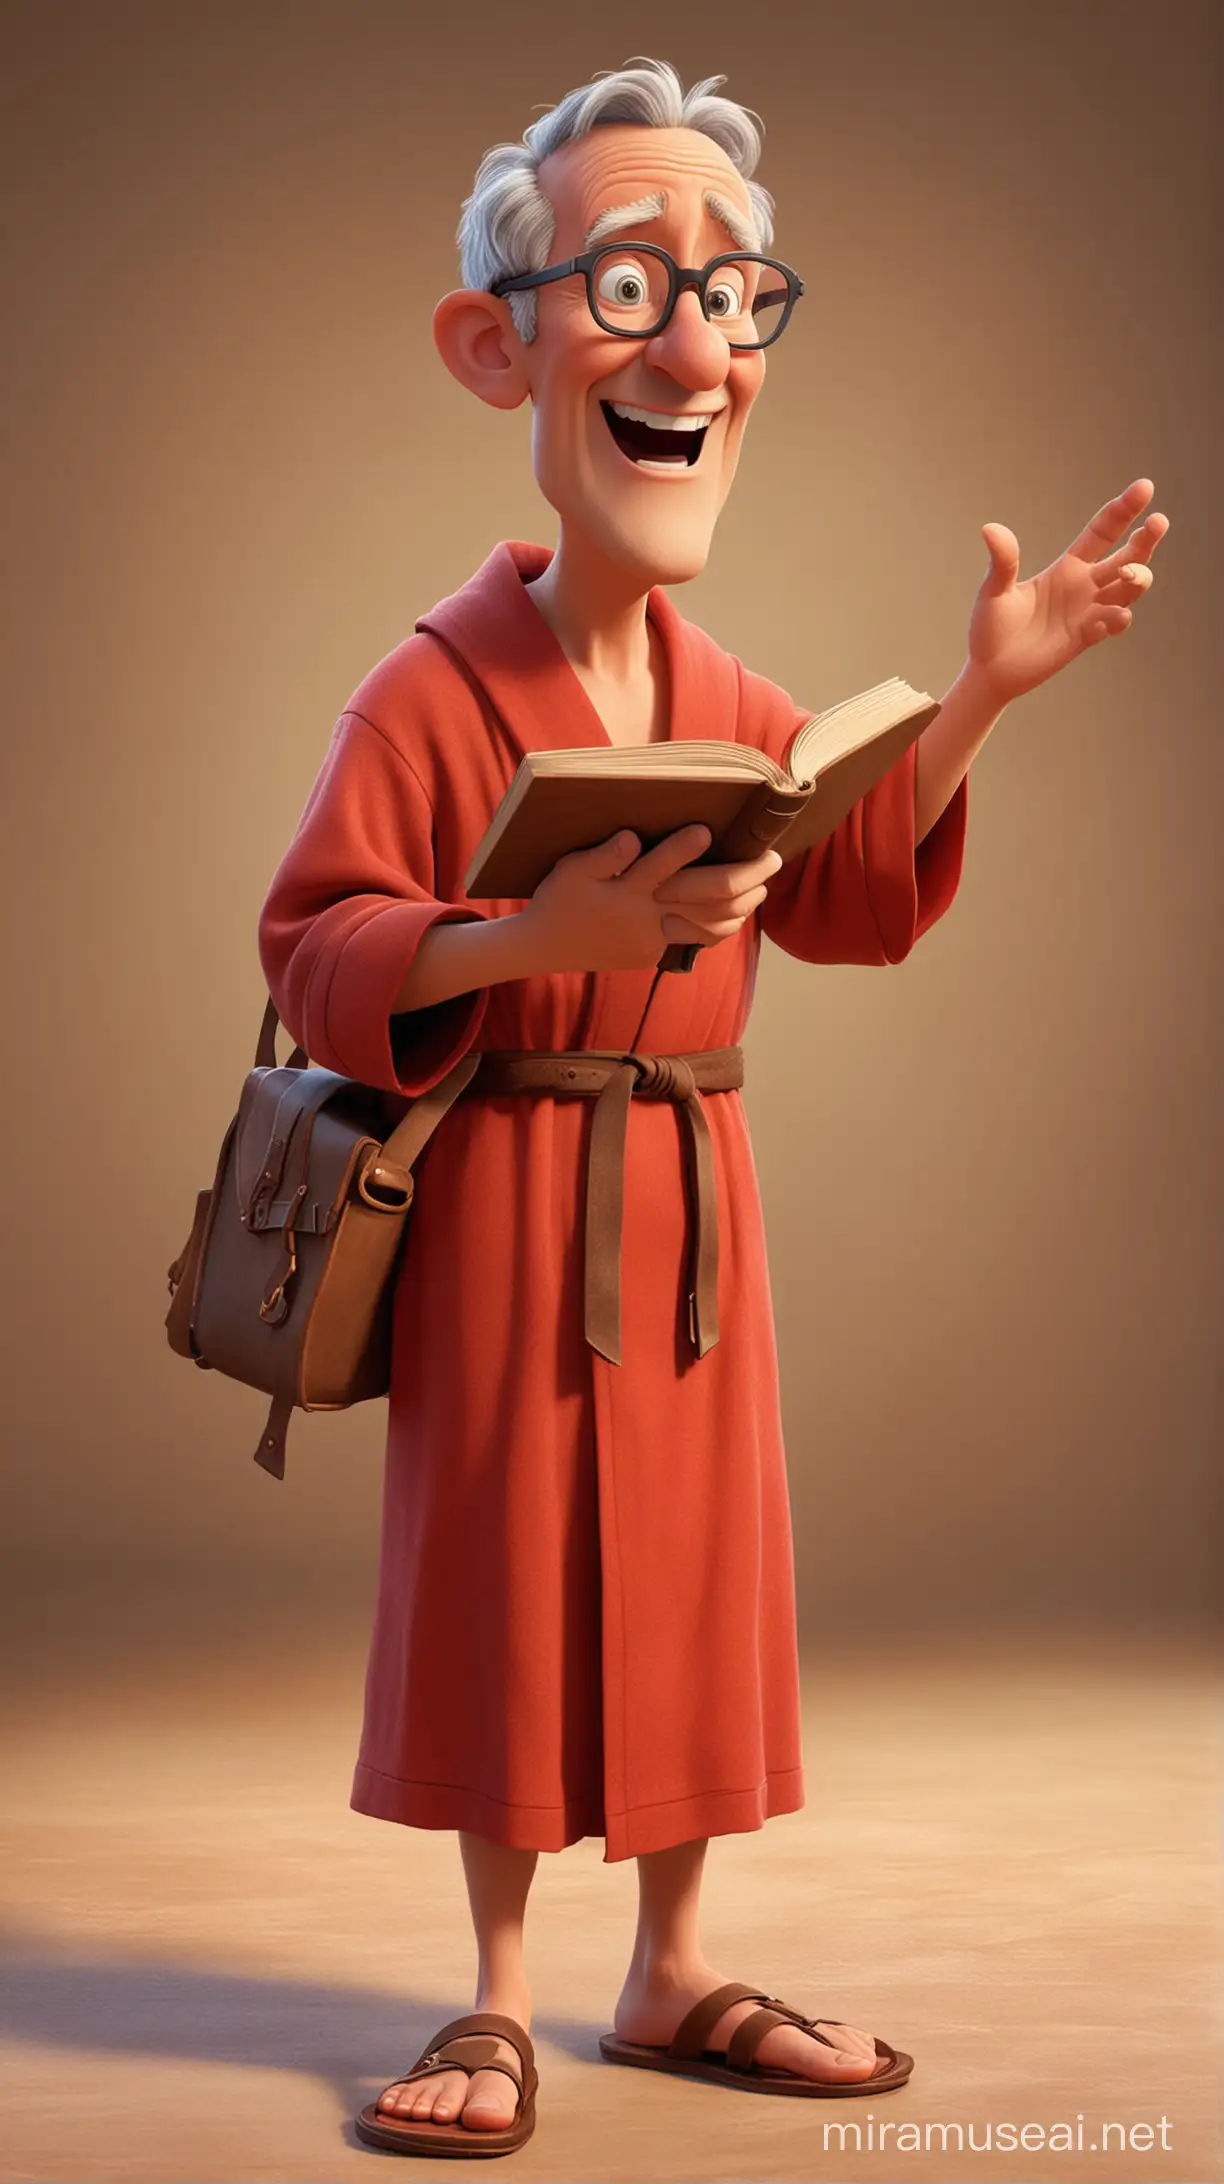 a roman professor in glasses, wearing leather sandals, in a red robe, fingers pointing up, carrying and reading a book, facial expression showing "did you know", PIXAR 3d